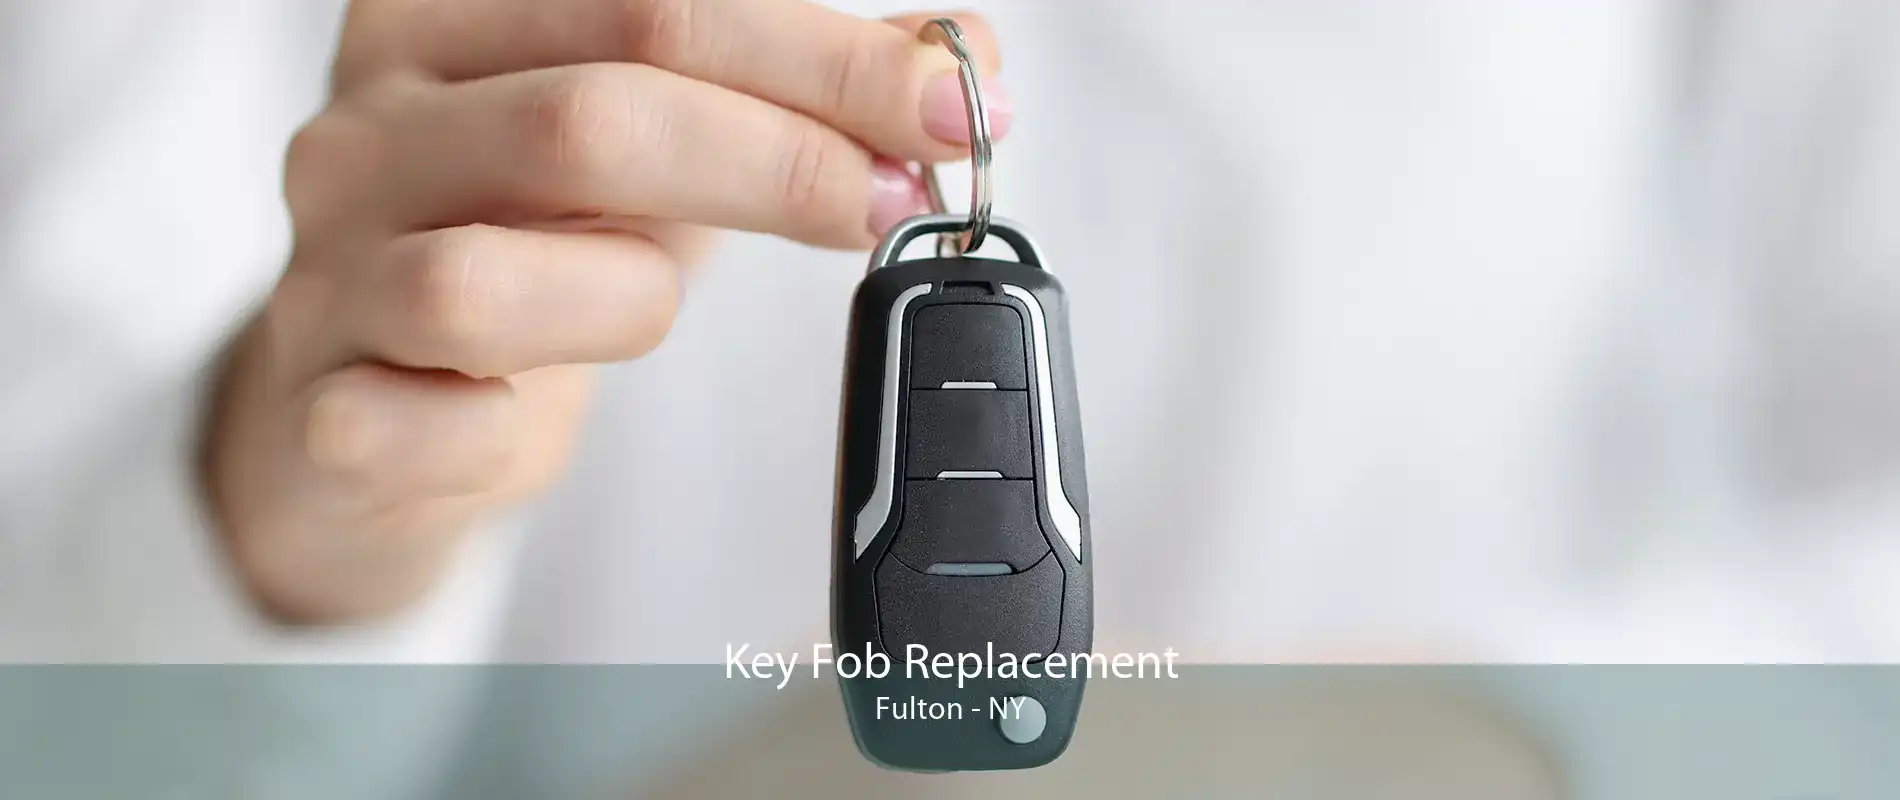 Key Fob Replacement Fulton - NY